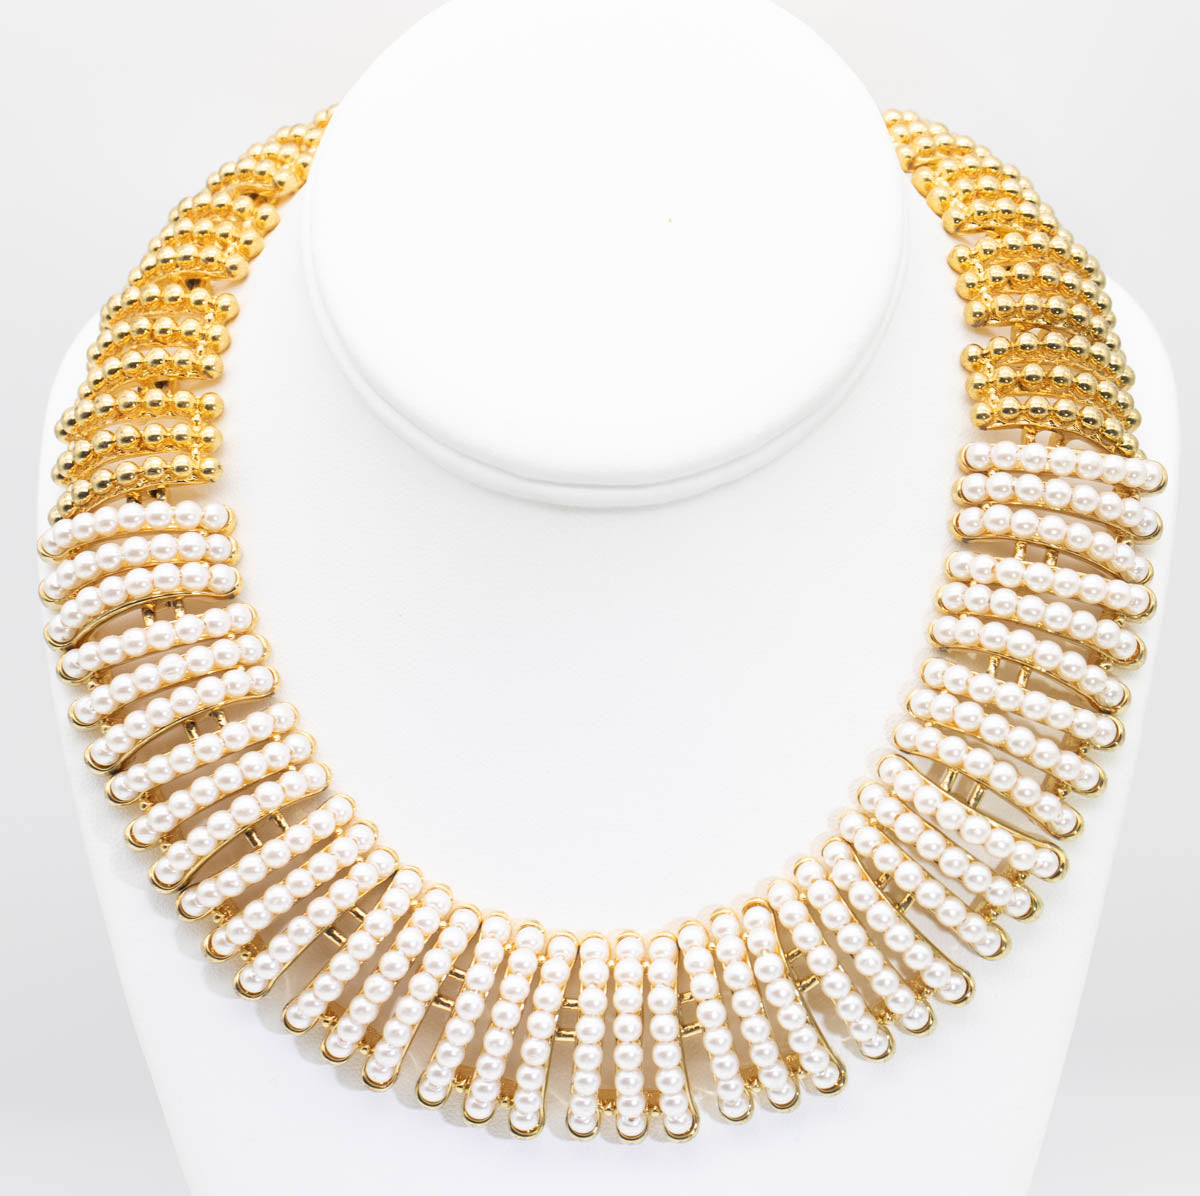 Napier Moonglow Collar Necklace - The Napier Book & Online Source for  Vintage Napier Jewelry